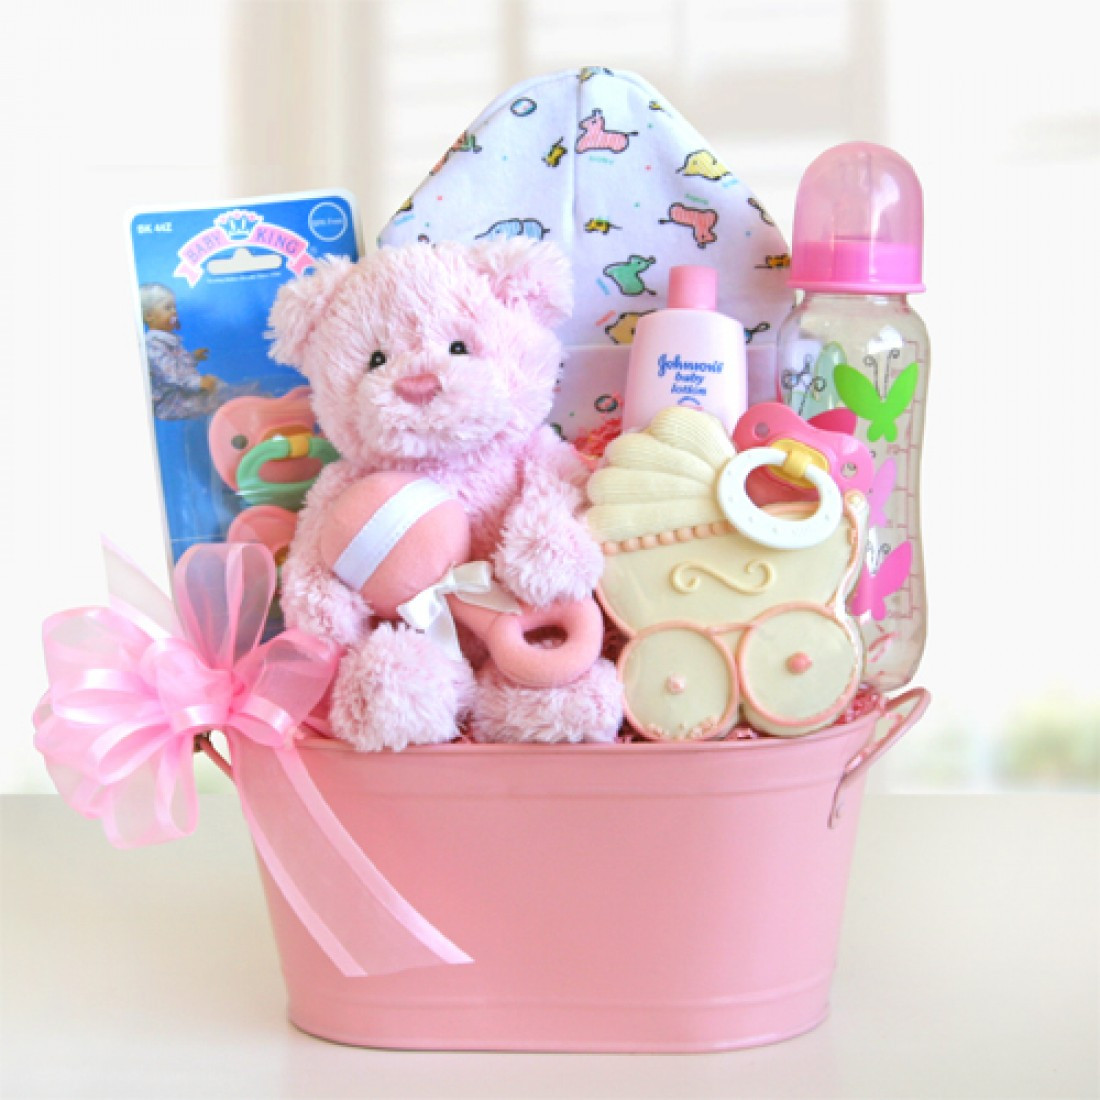 New Born Baby Gift Basket
 Cute Package New Baby Gift Baskets